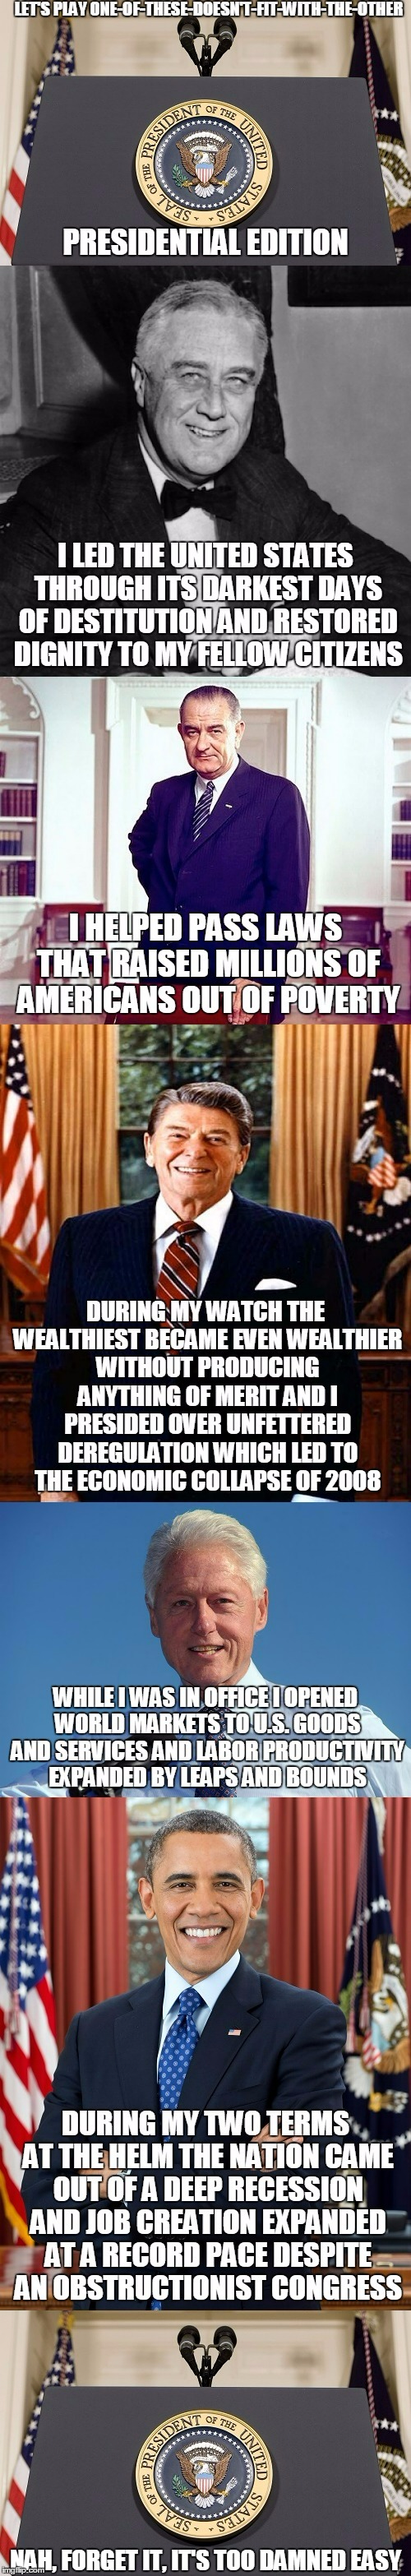 okay - remind me again why you worship Reagan? | NAH, FORGET IT, IT'S TOO DAMNED EASY | image tagged in politics,presidents,liberal vs conservative | made w/ Imgflip meme maker